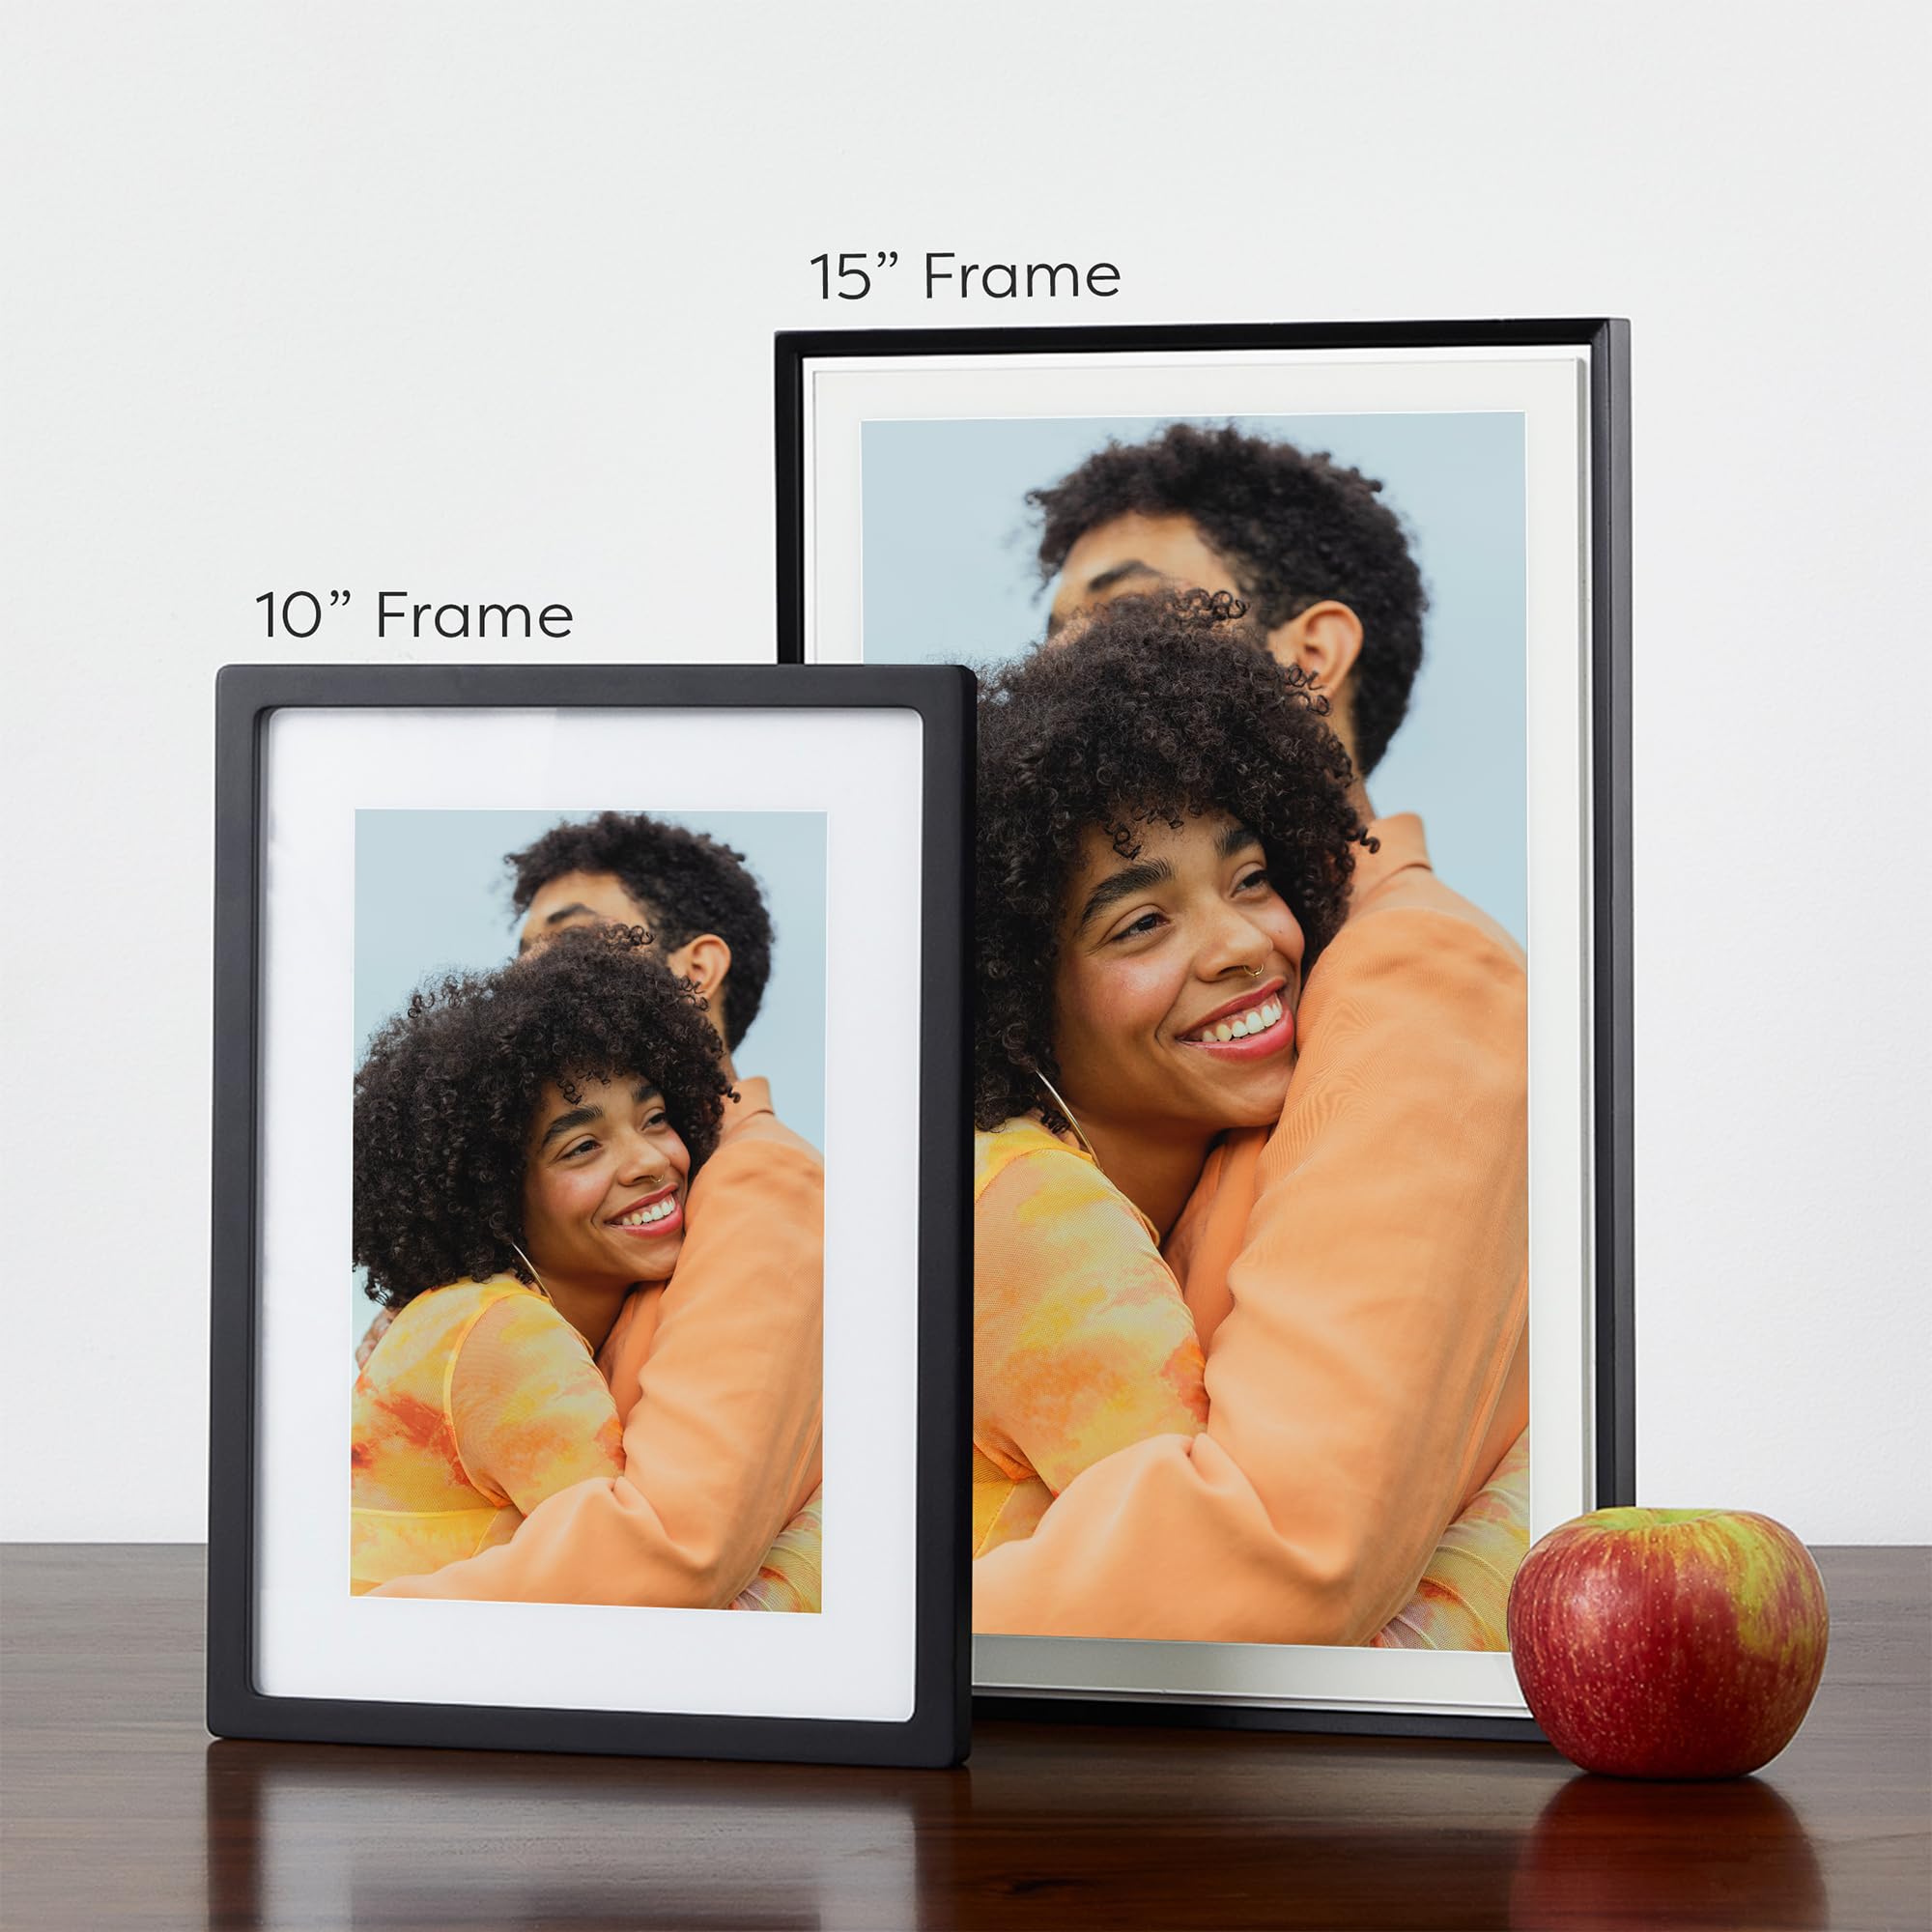 Skylight Digital Picture Frame 2 Pack: WiFi Enabled with Load from Phone Capability, Touch Screen Digital Photo Frame Display - Customizable Gift for Friends and Family - 10 Inch